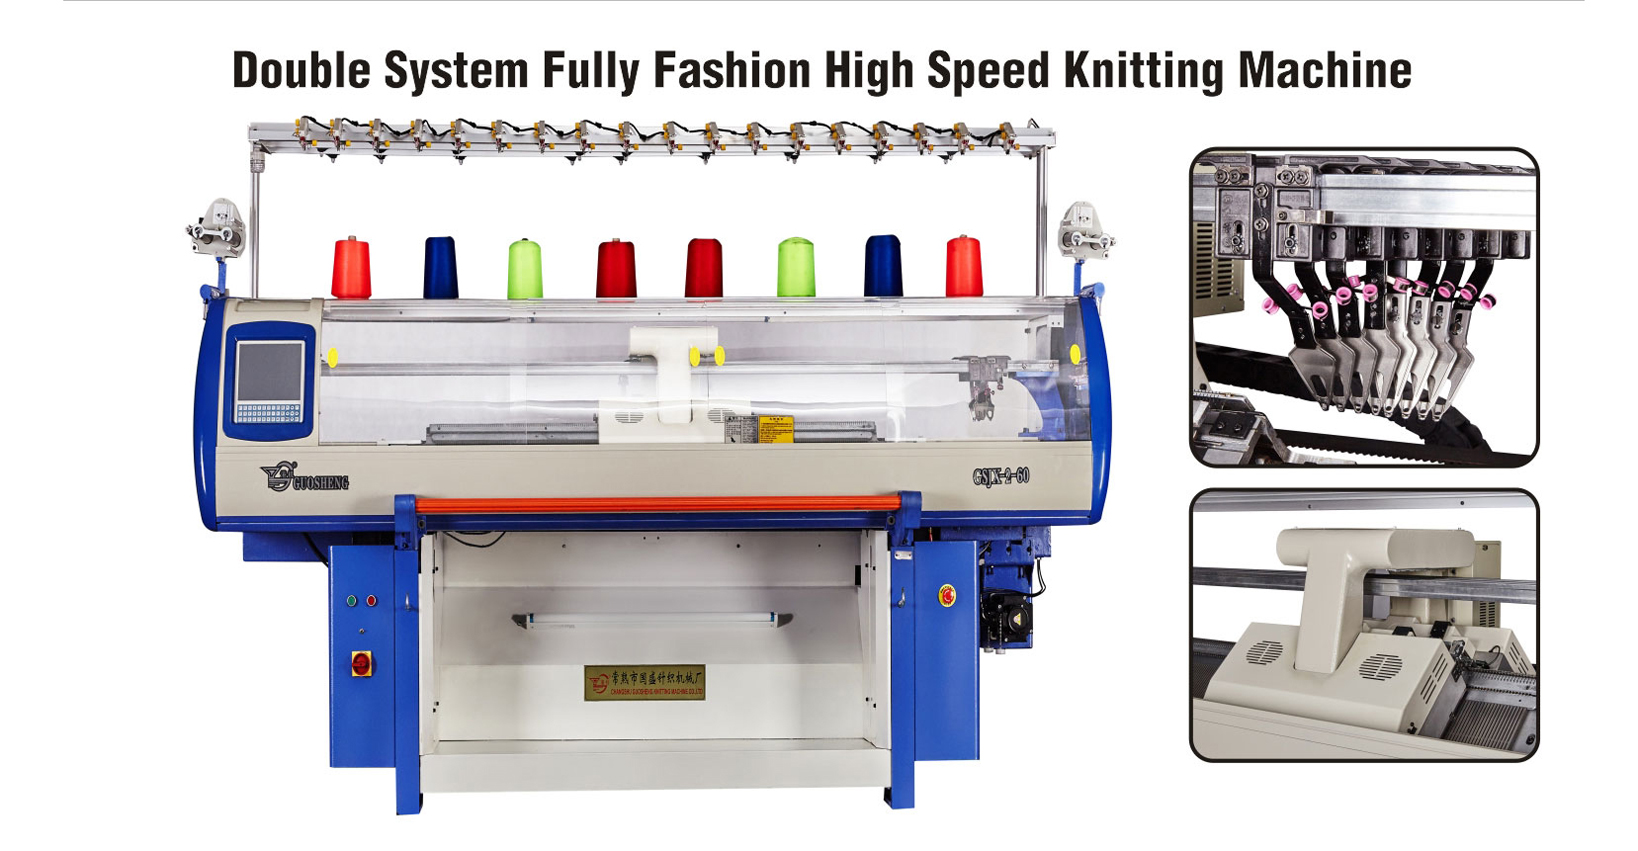 Double System Fully Fashion High Speed Knitting Machine